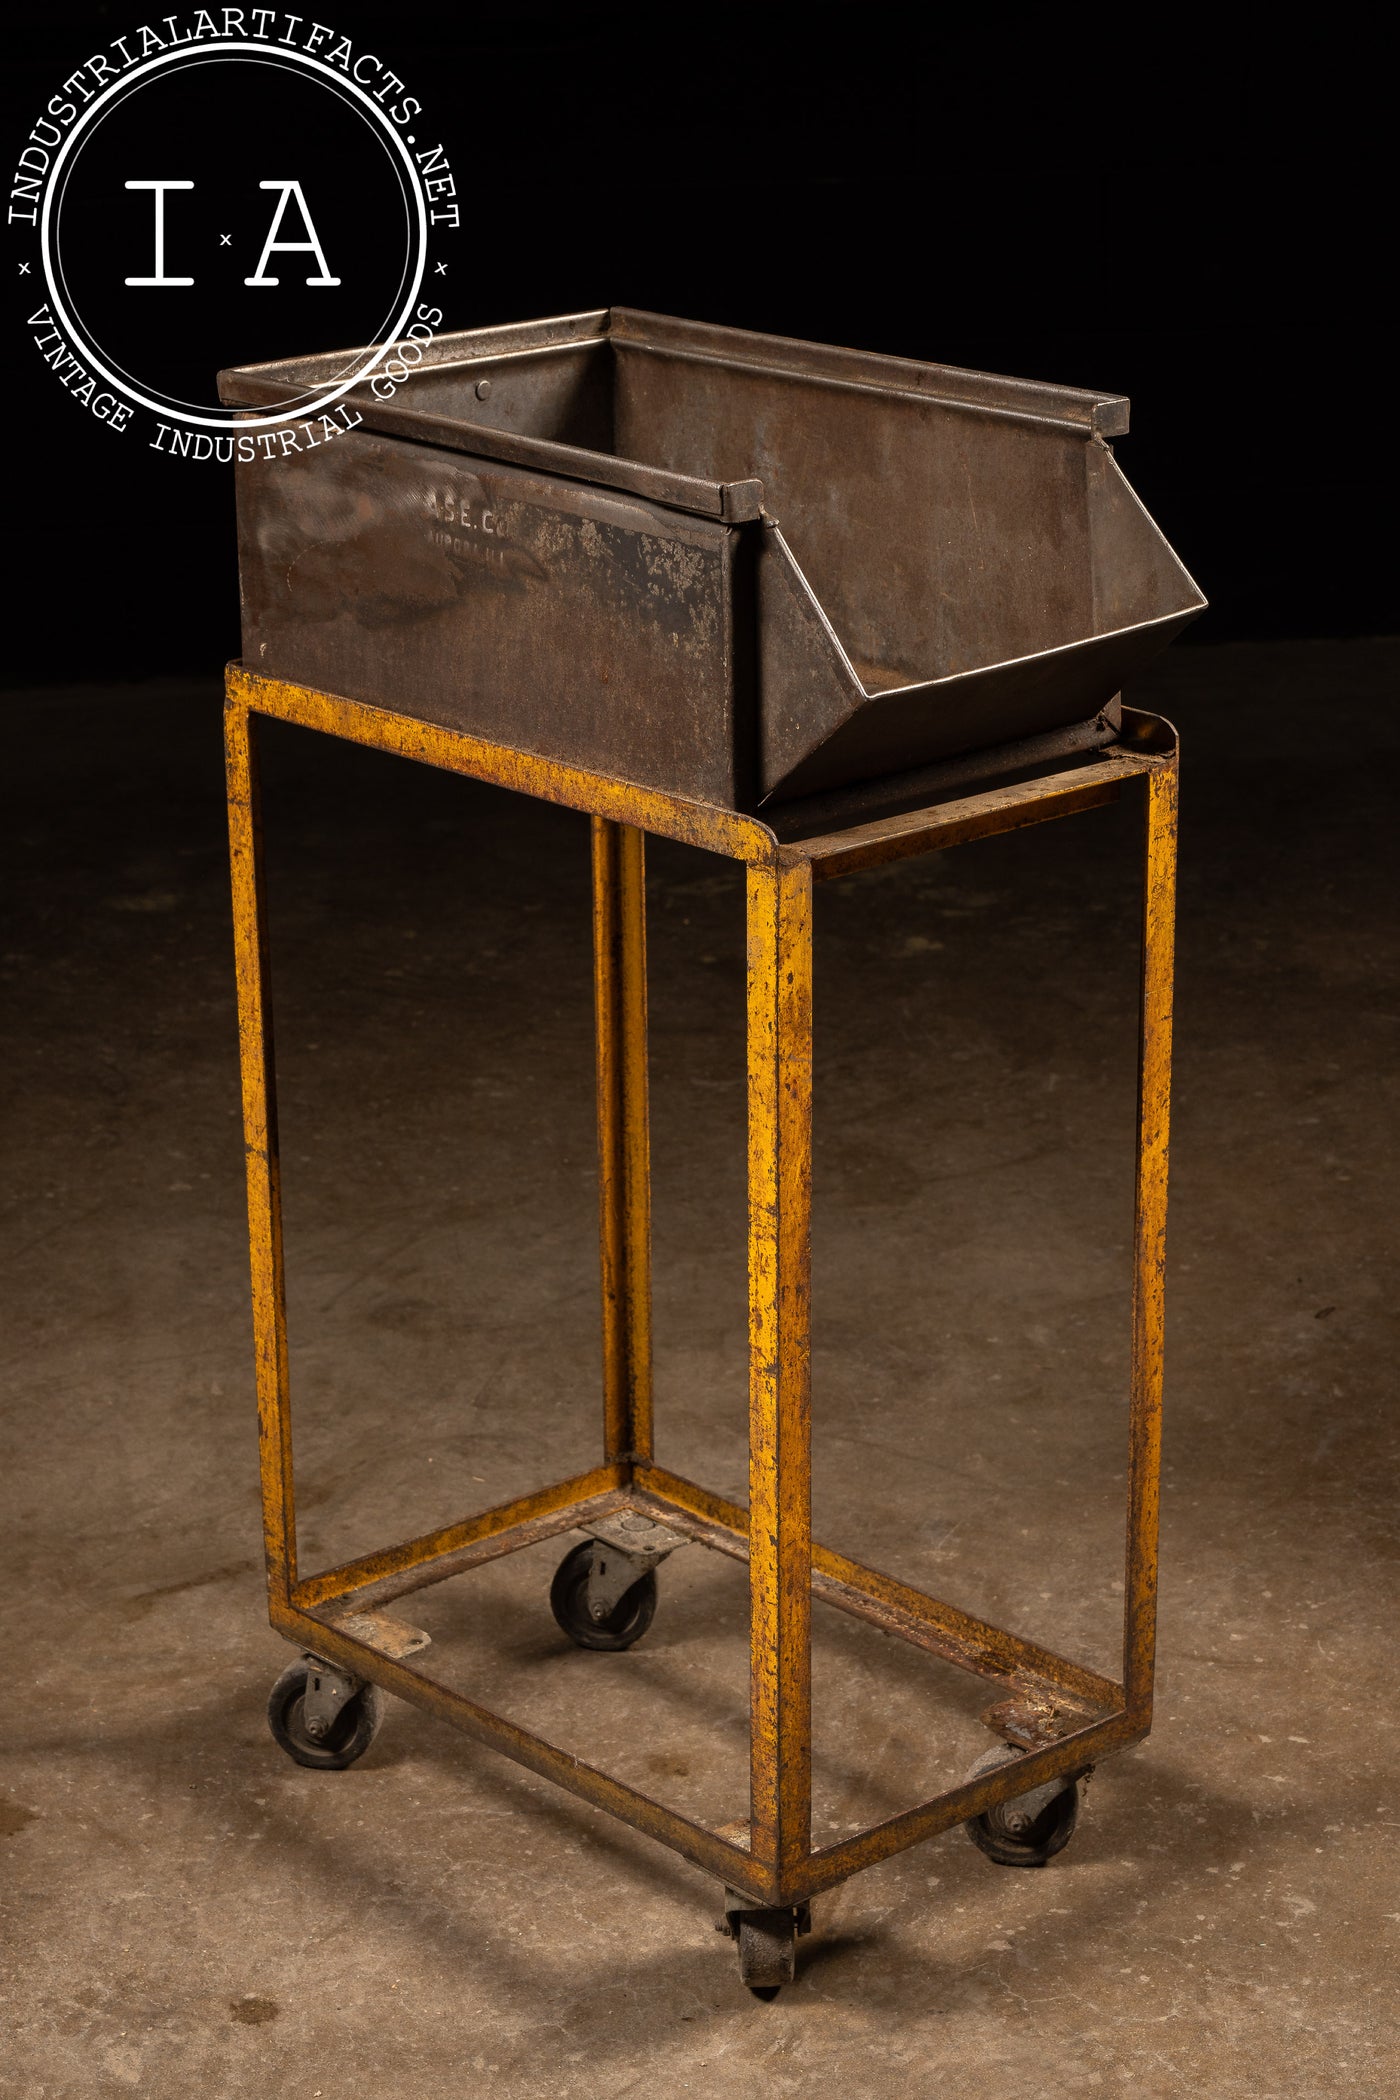 Vintage Industrial Rolling Cart with Storage